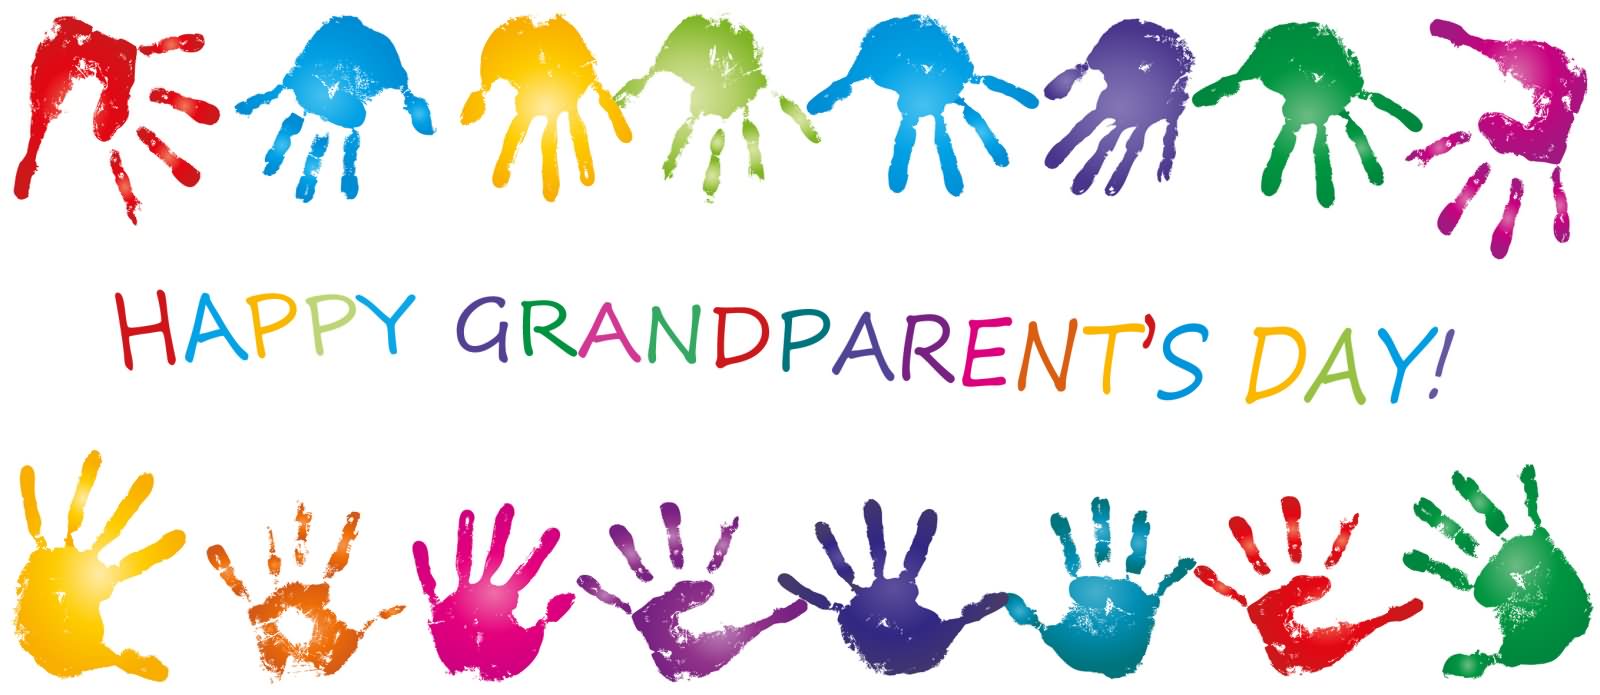 grandparents-clipart-word-grandparents-word-transparent-free-for